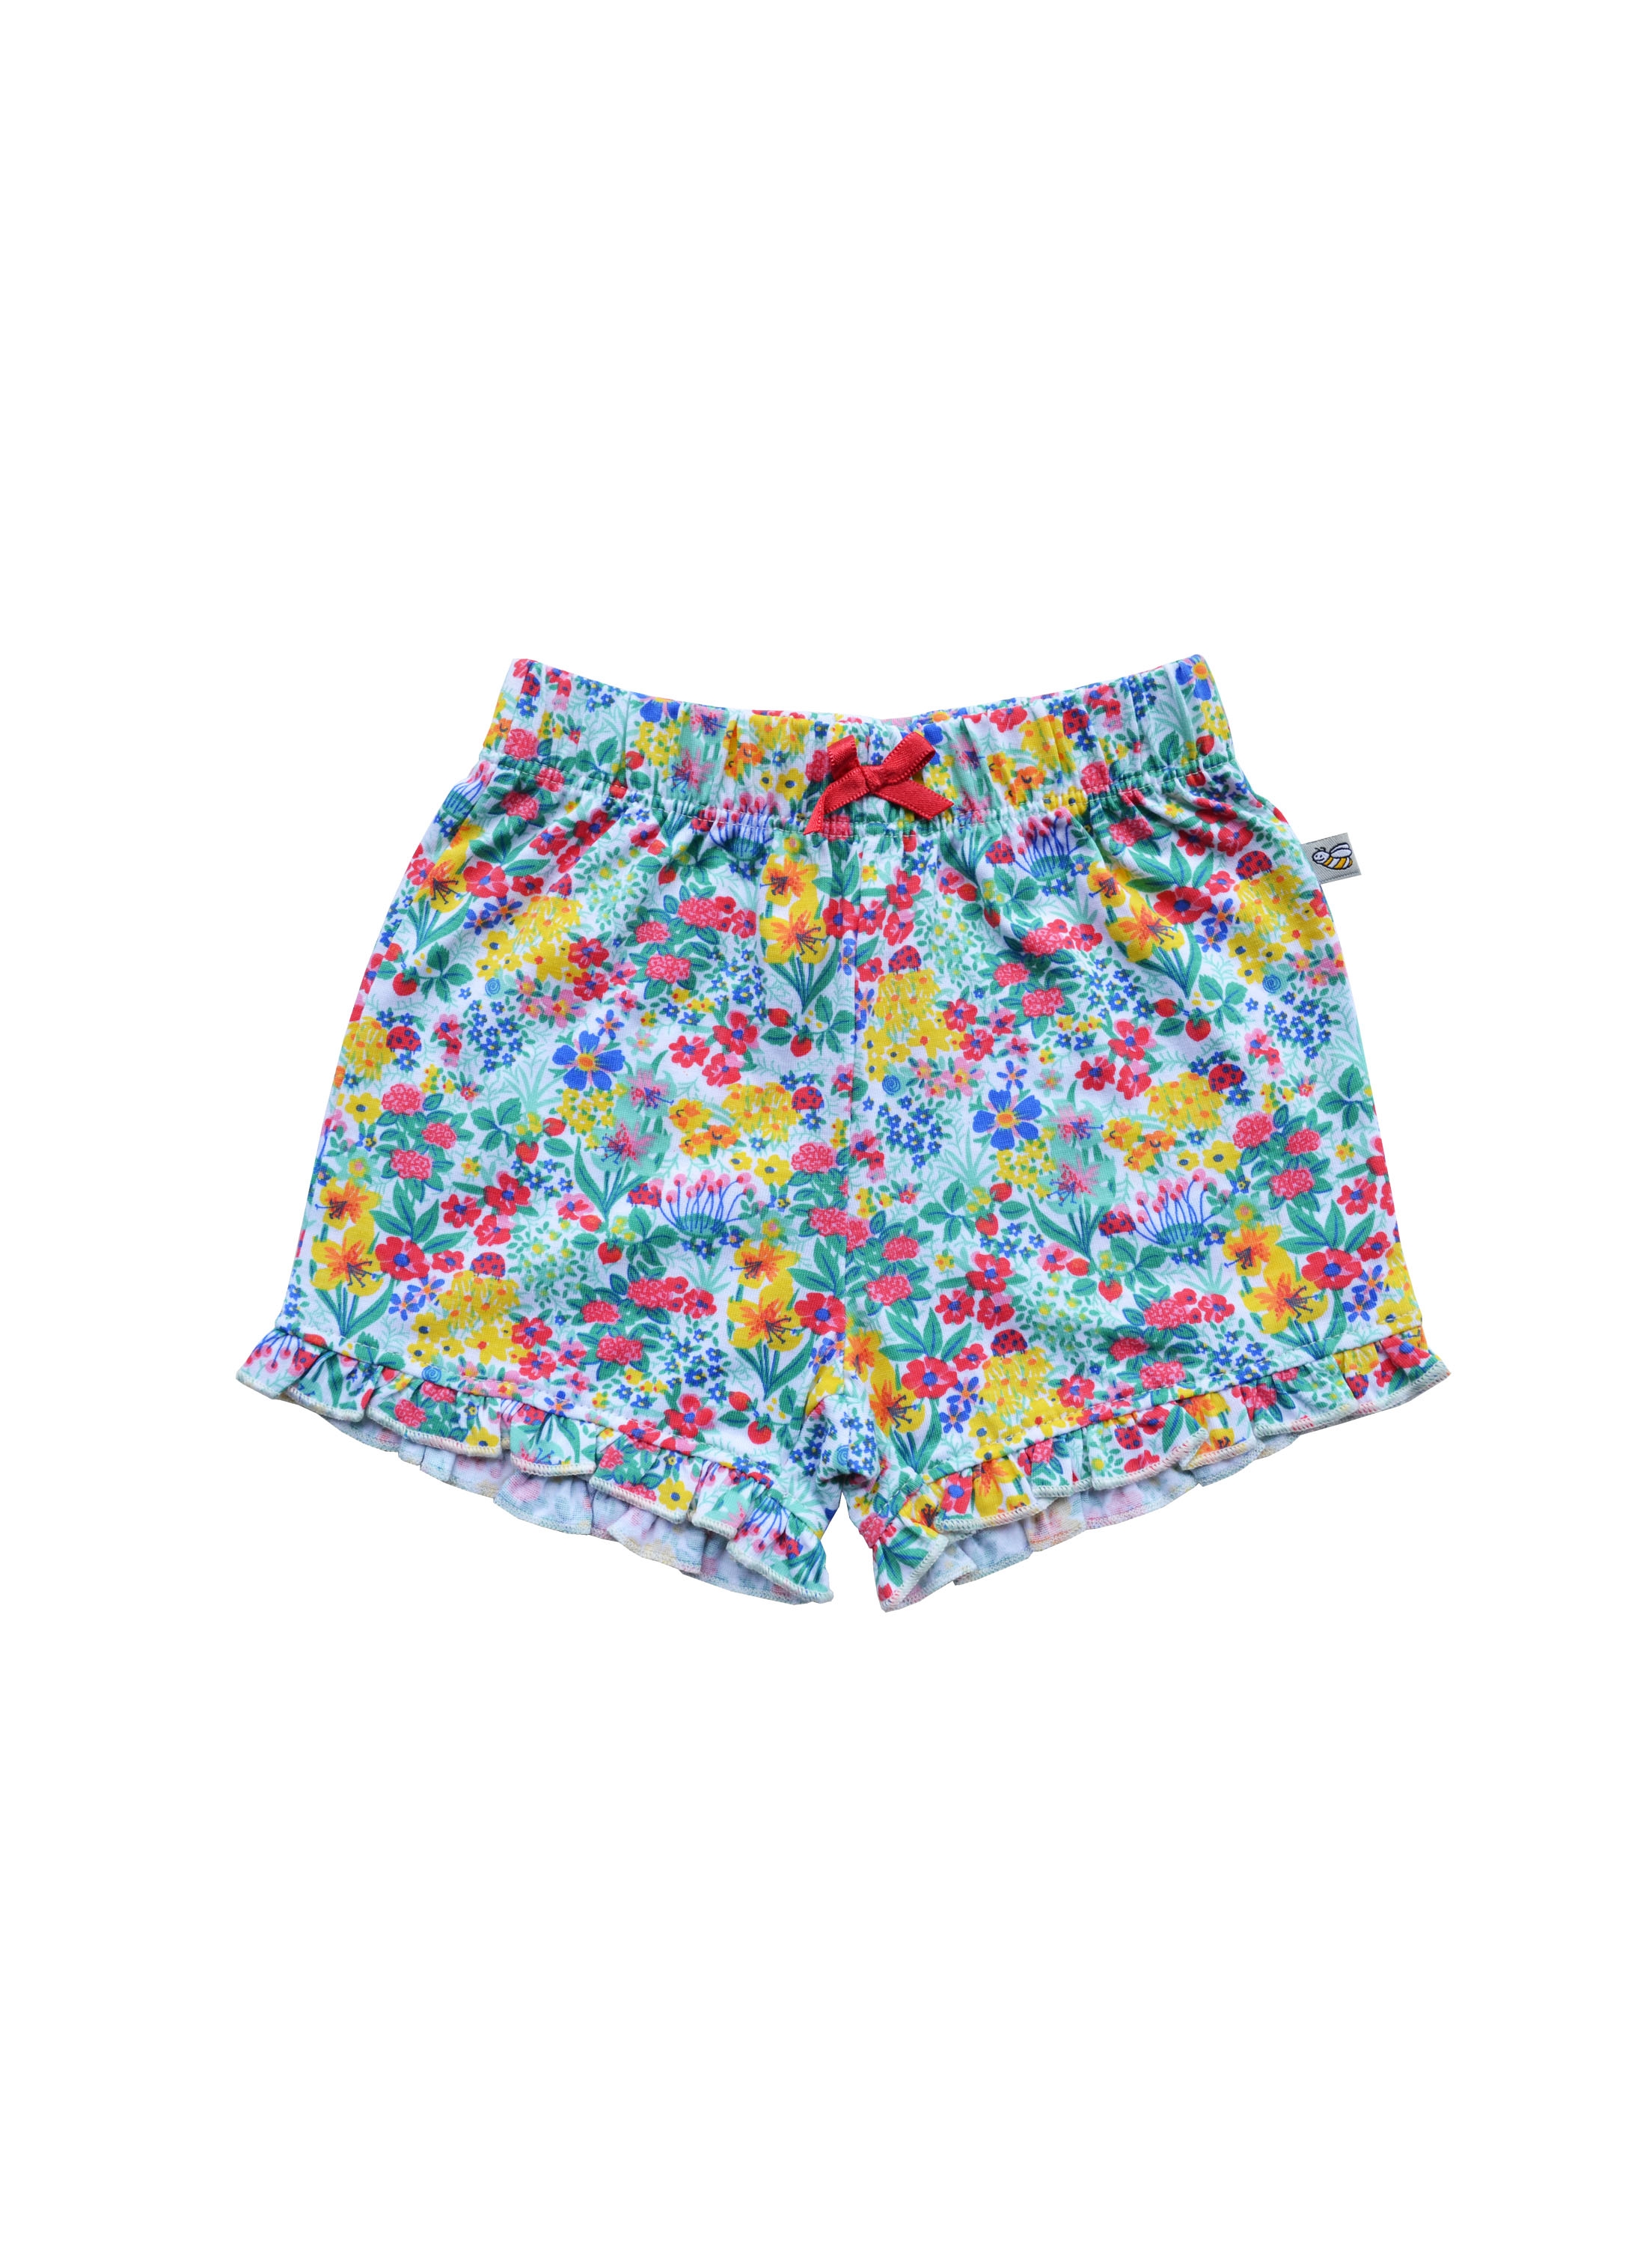 Babeez | Allover Multicolored Flower Print Girls Shorts (100% Cotton Jersey) undefined